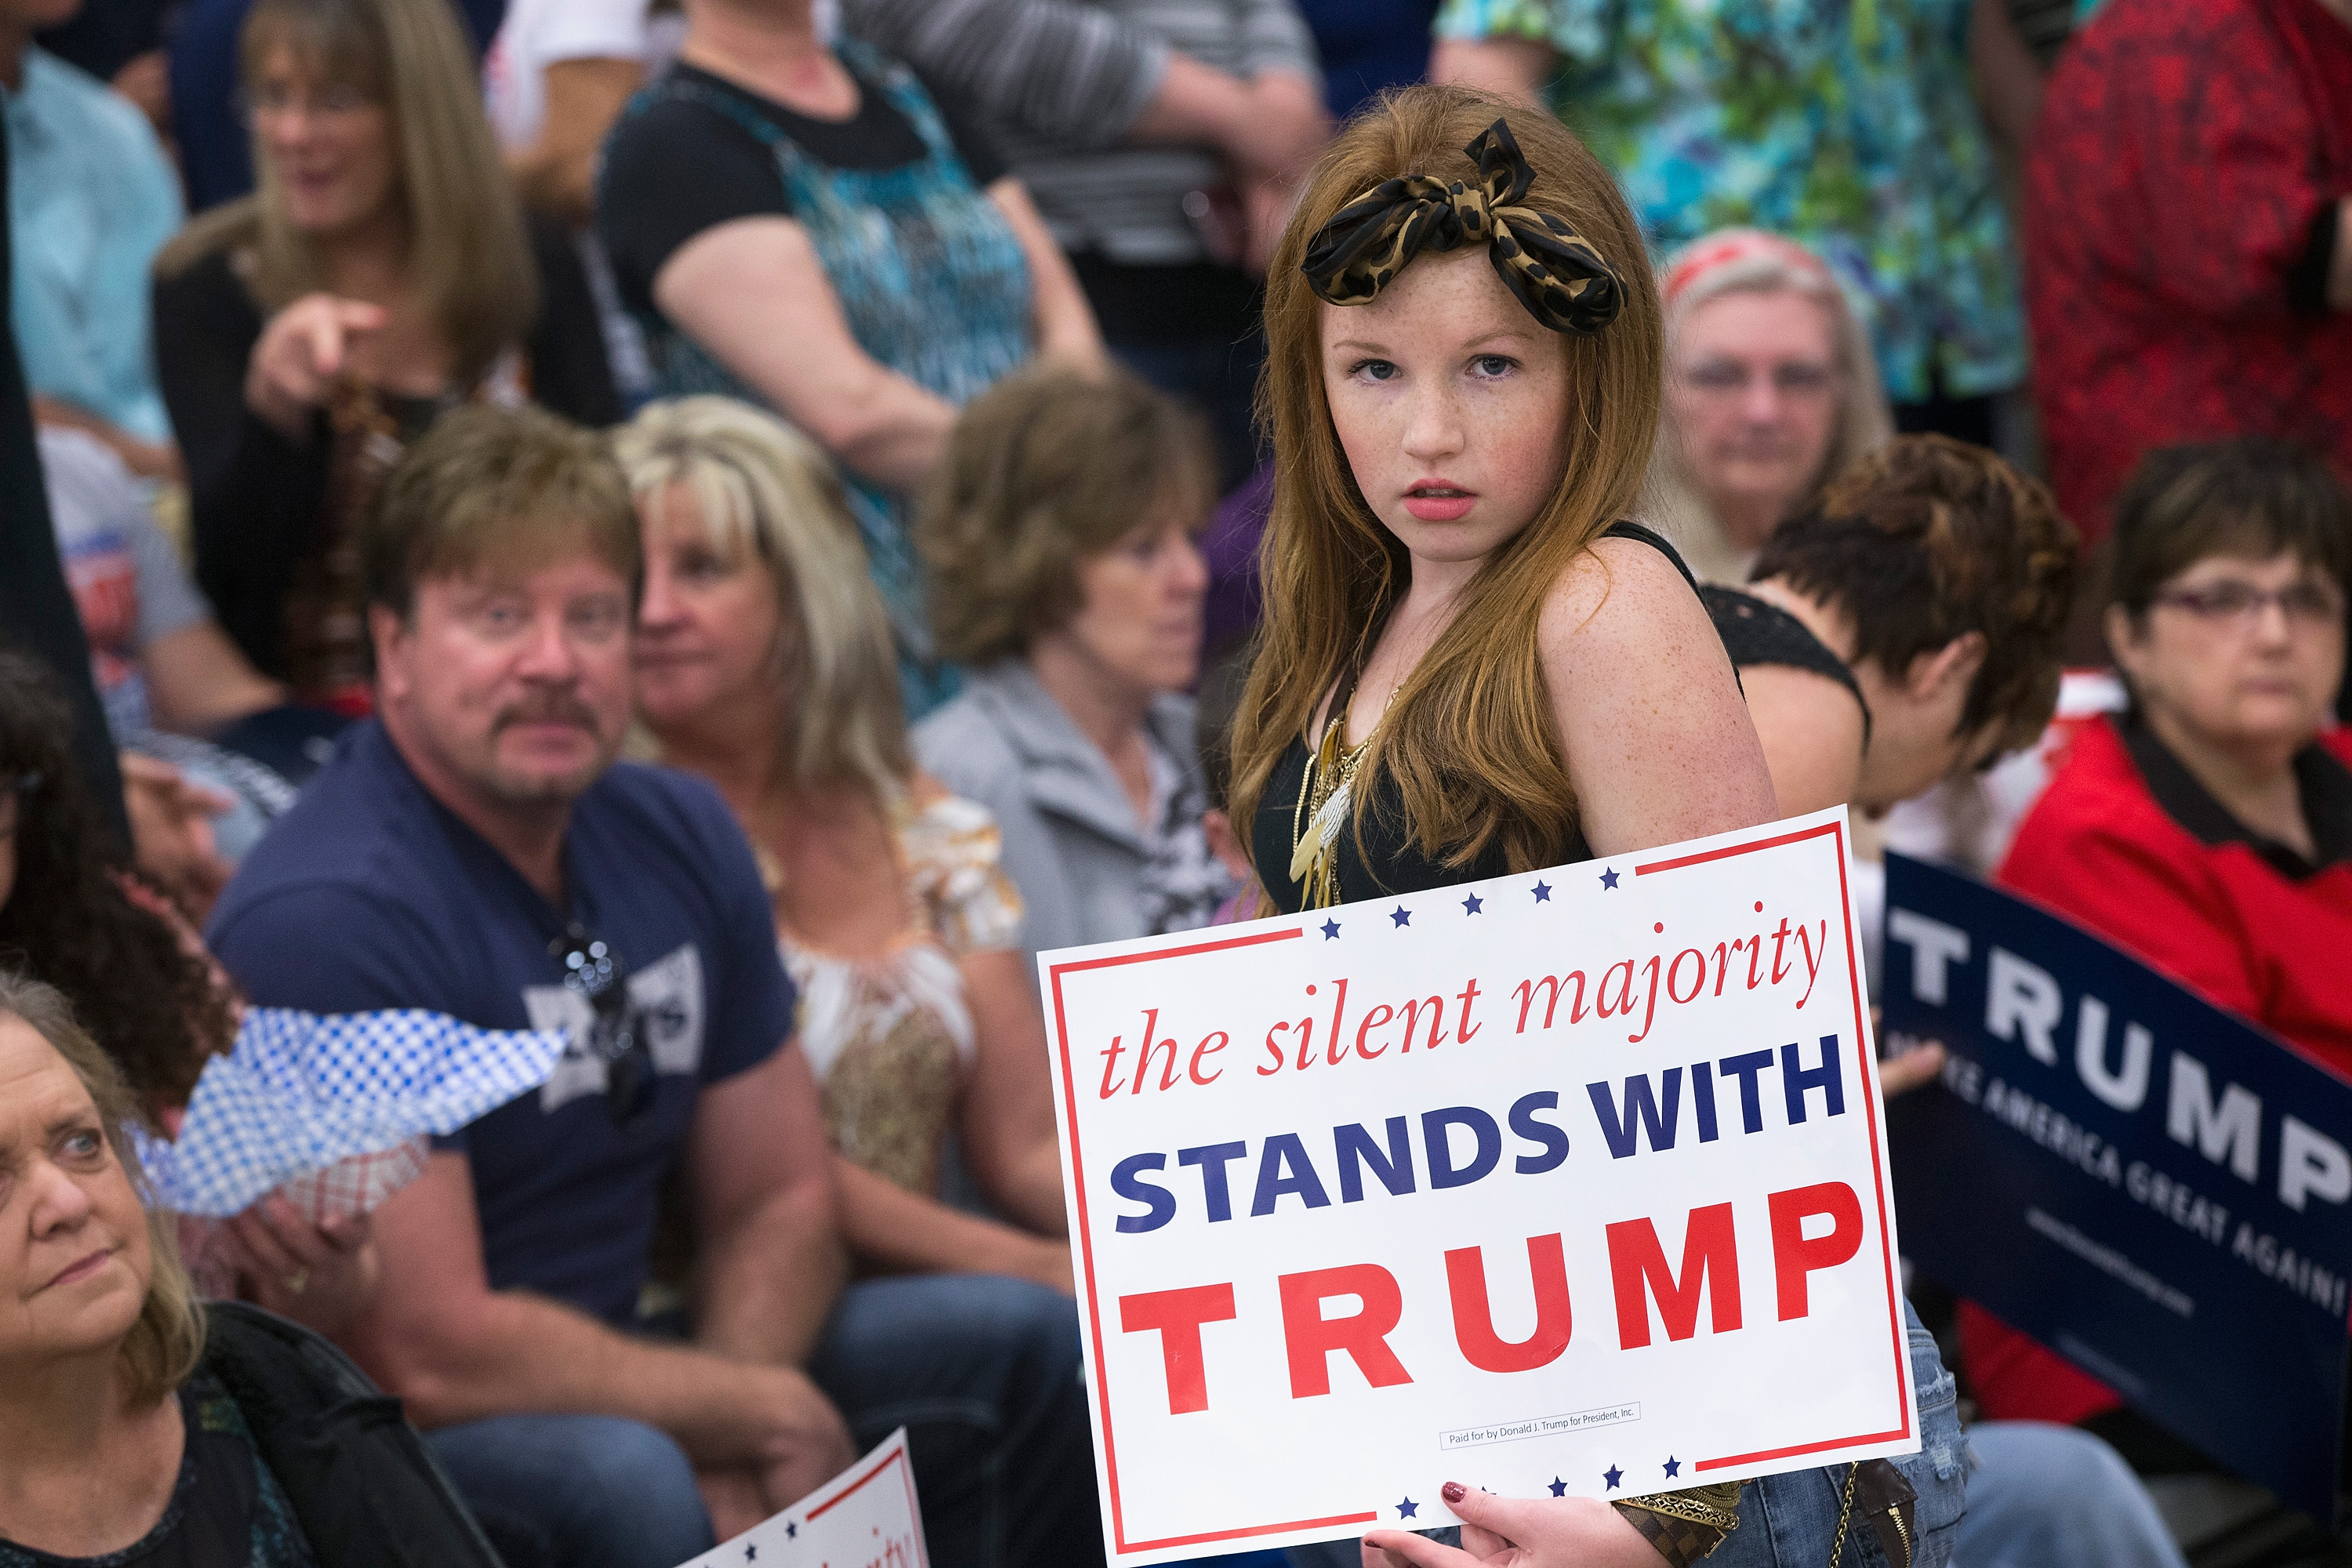 INDIANAPOLIS, IN - APRIL 20: Guests and supporters wait for Republican presidential candidate Donald Trump to speak at a rally at the Indiana State Fairgrounds on April 20, 2016 in Indianapolis, Indiana. There are 57 delegates at stake in Indianas May 3 primary. 